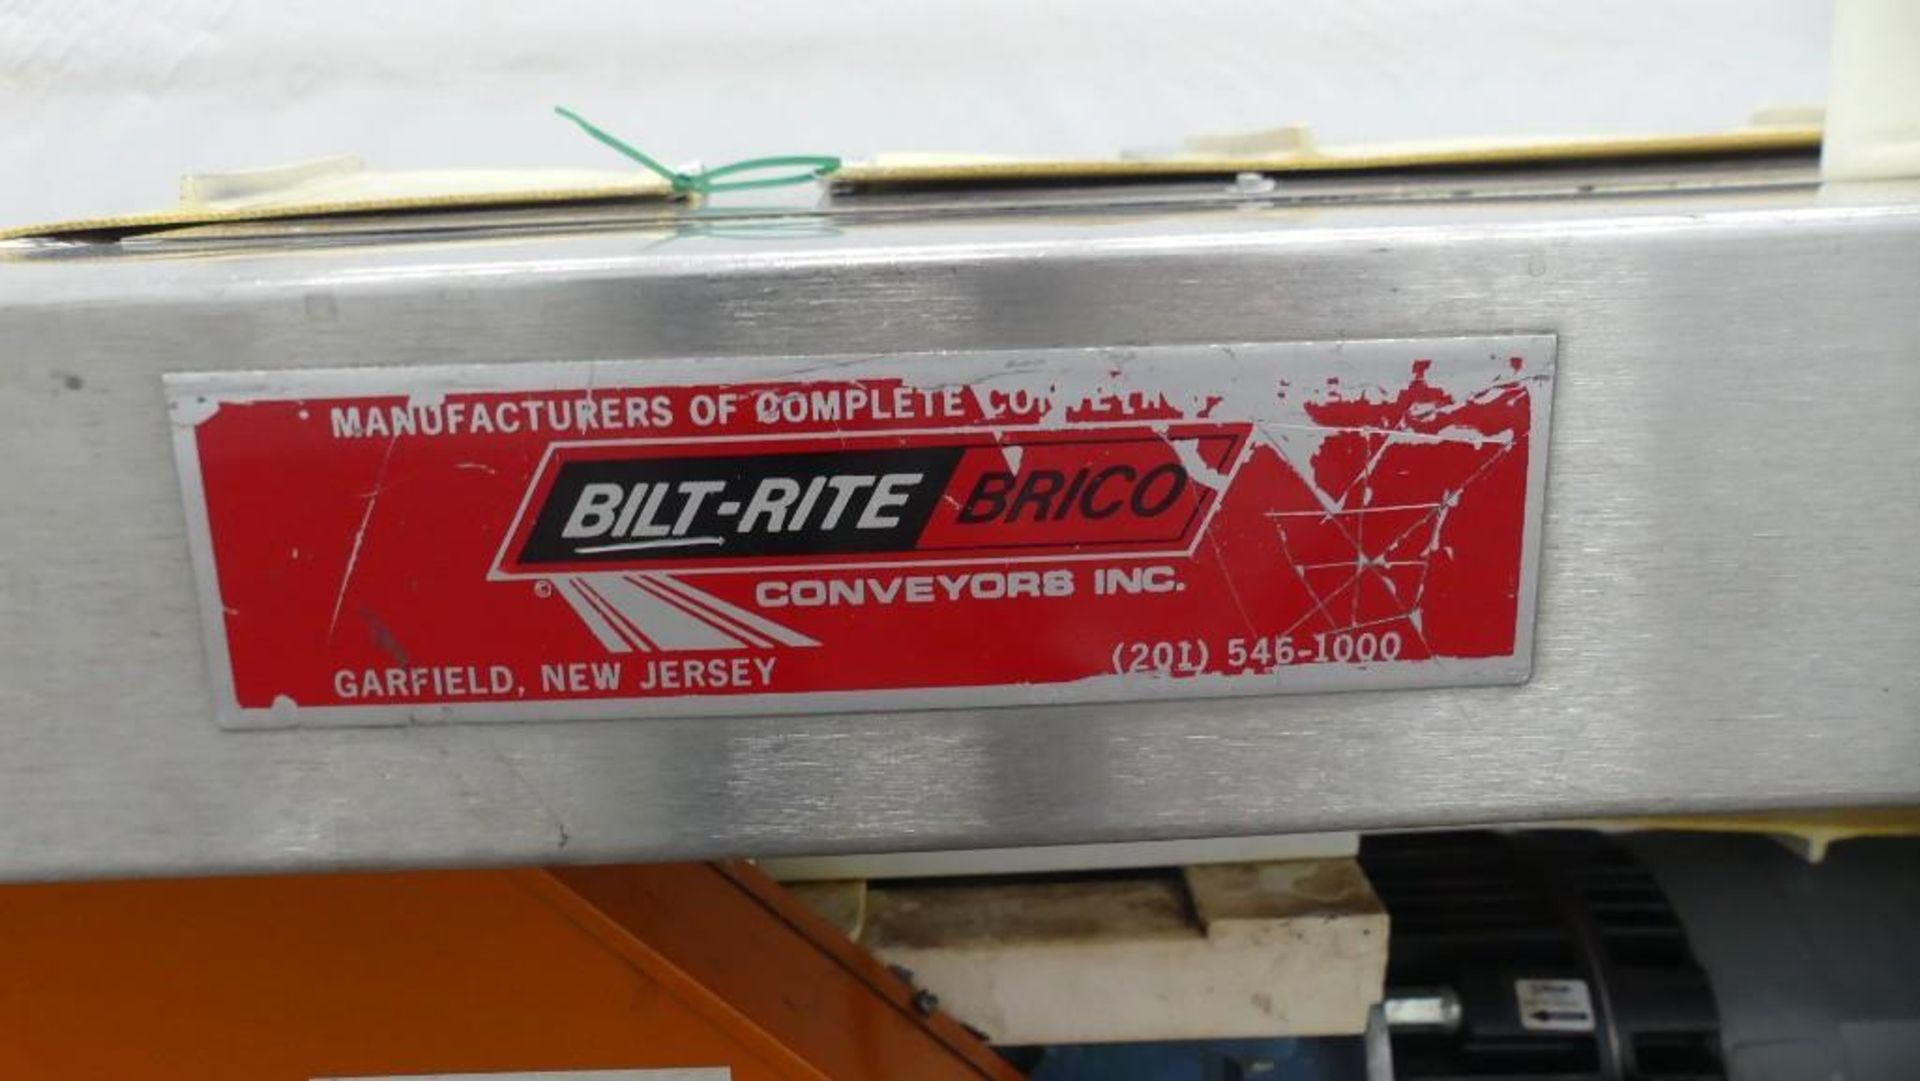 Bilt-Rite Brico Stainless Steel Cleated Transfer Conveyor - Image 8 of 16